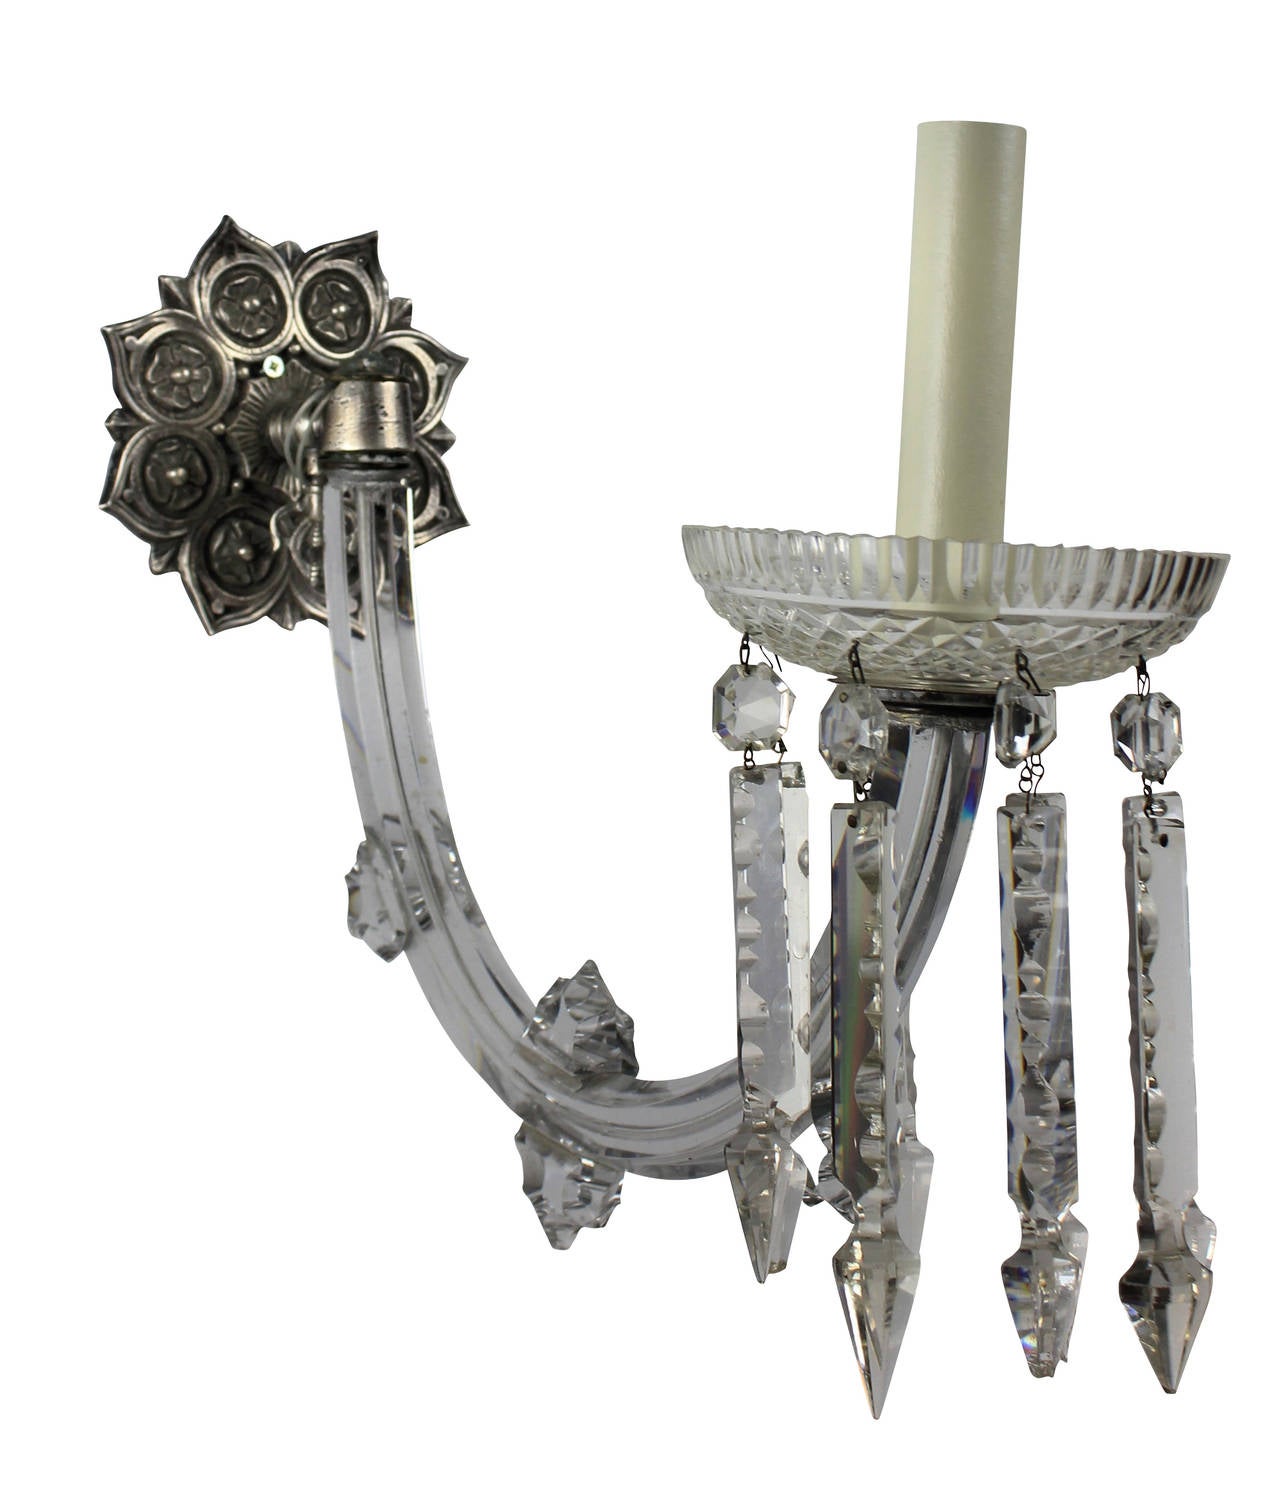 A pair of good quality English single arm sconces, with large up-swept hand cut-glass arms with decorative glass finials and a finely cut dish with pendants. The metal work of silvered bronze.